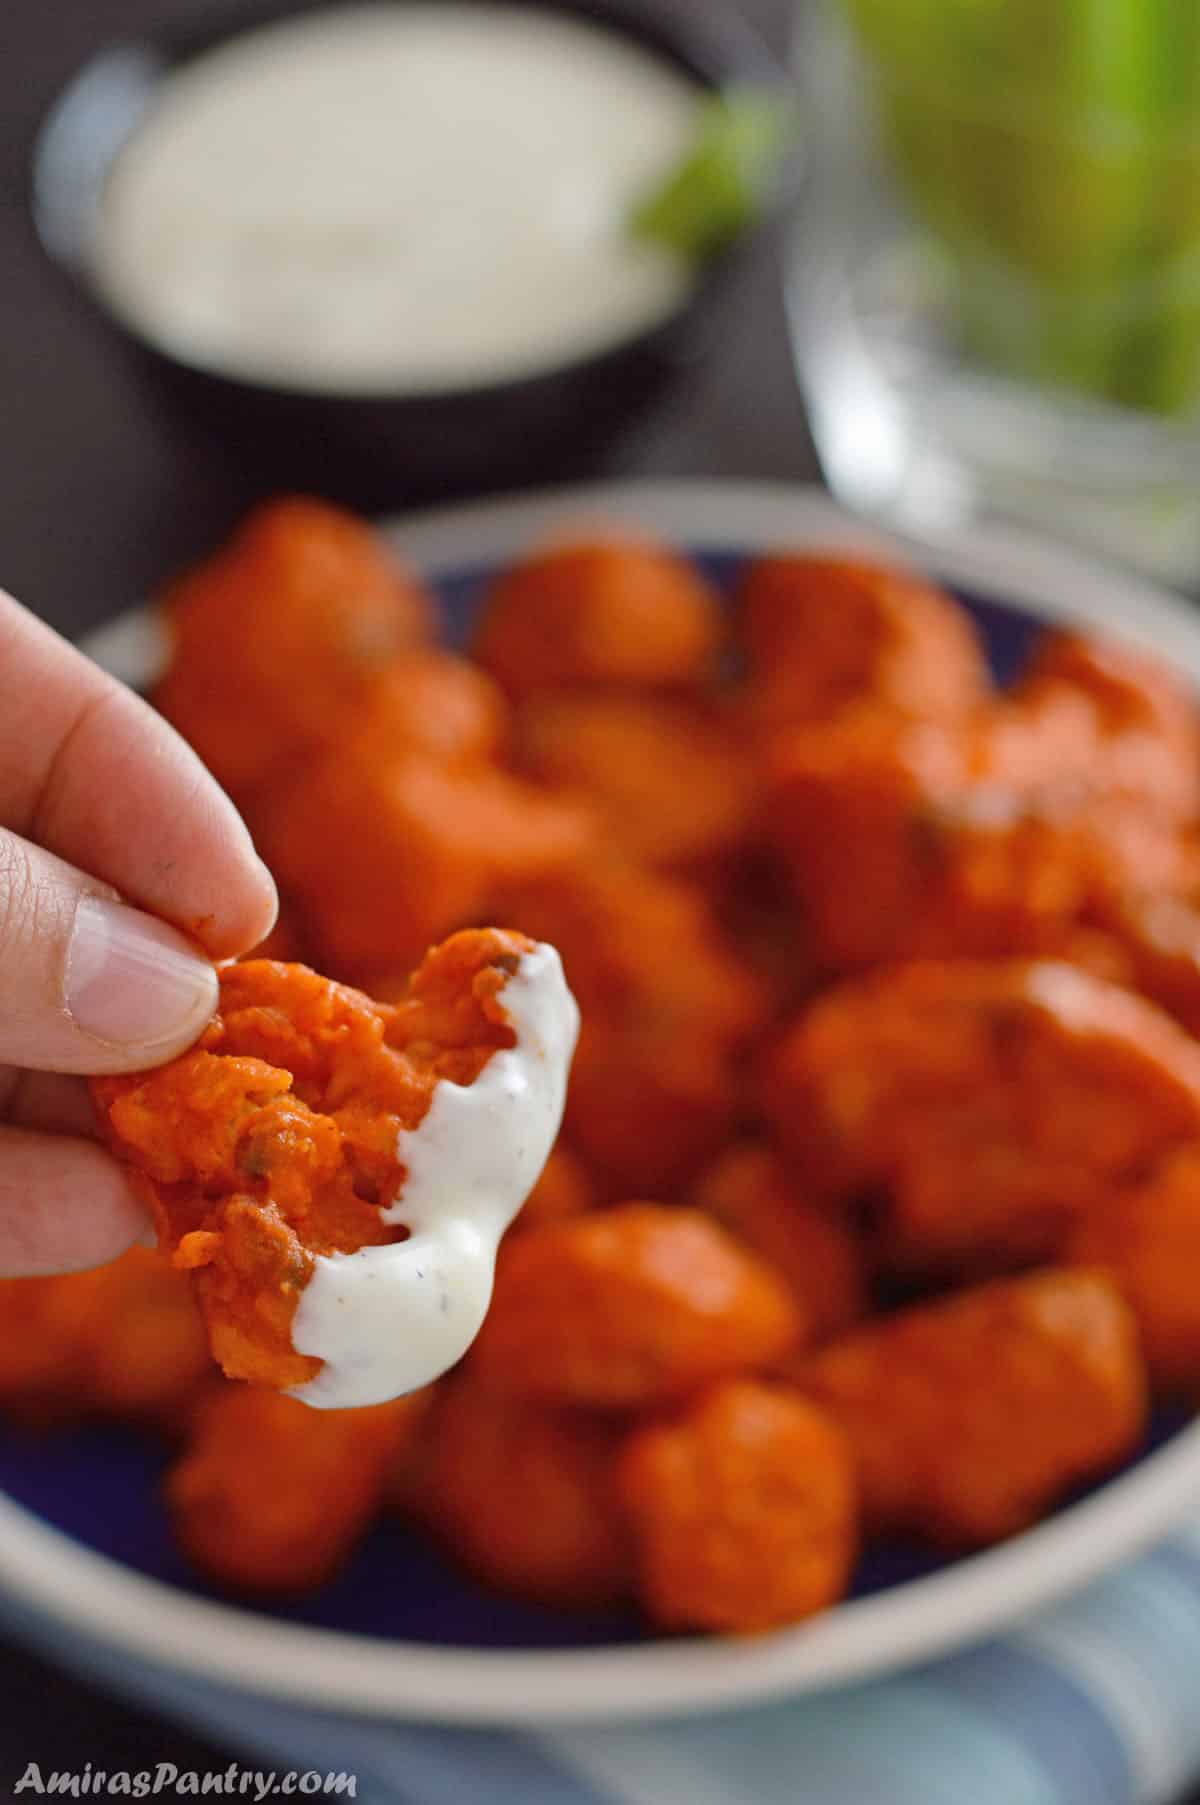 A hand holding a piece of crispy buffalo cauliflower dipped in ranch sauce.